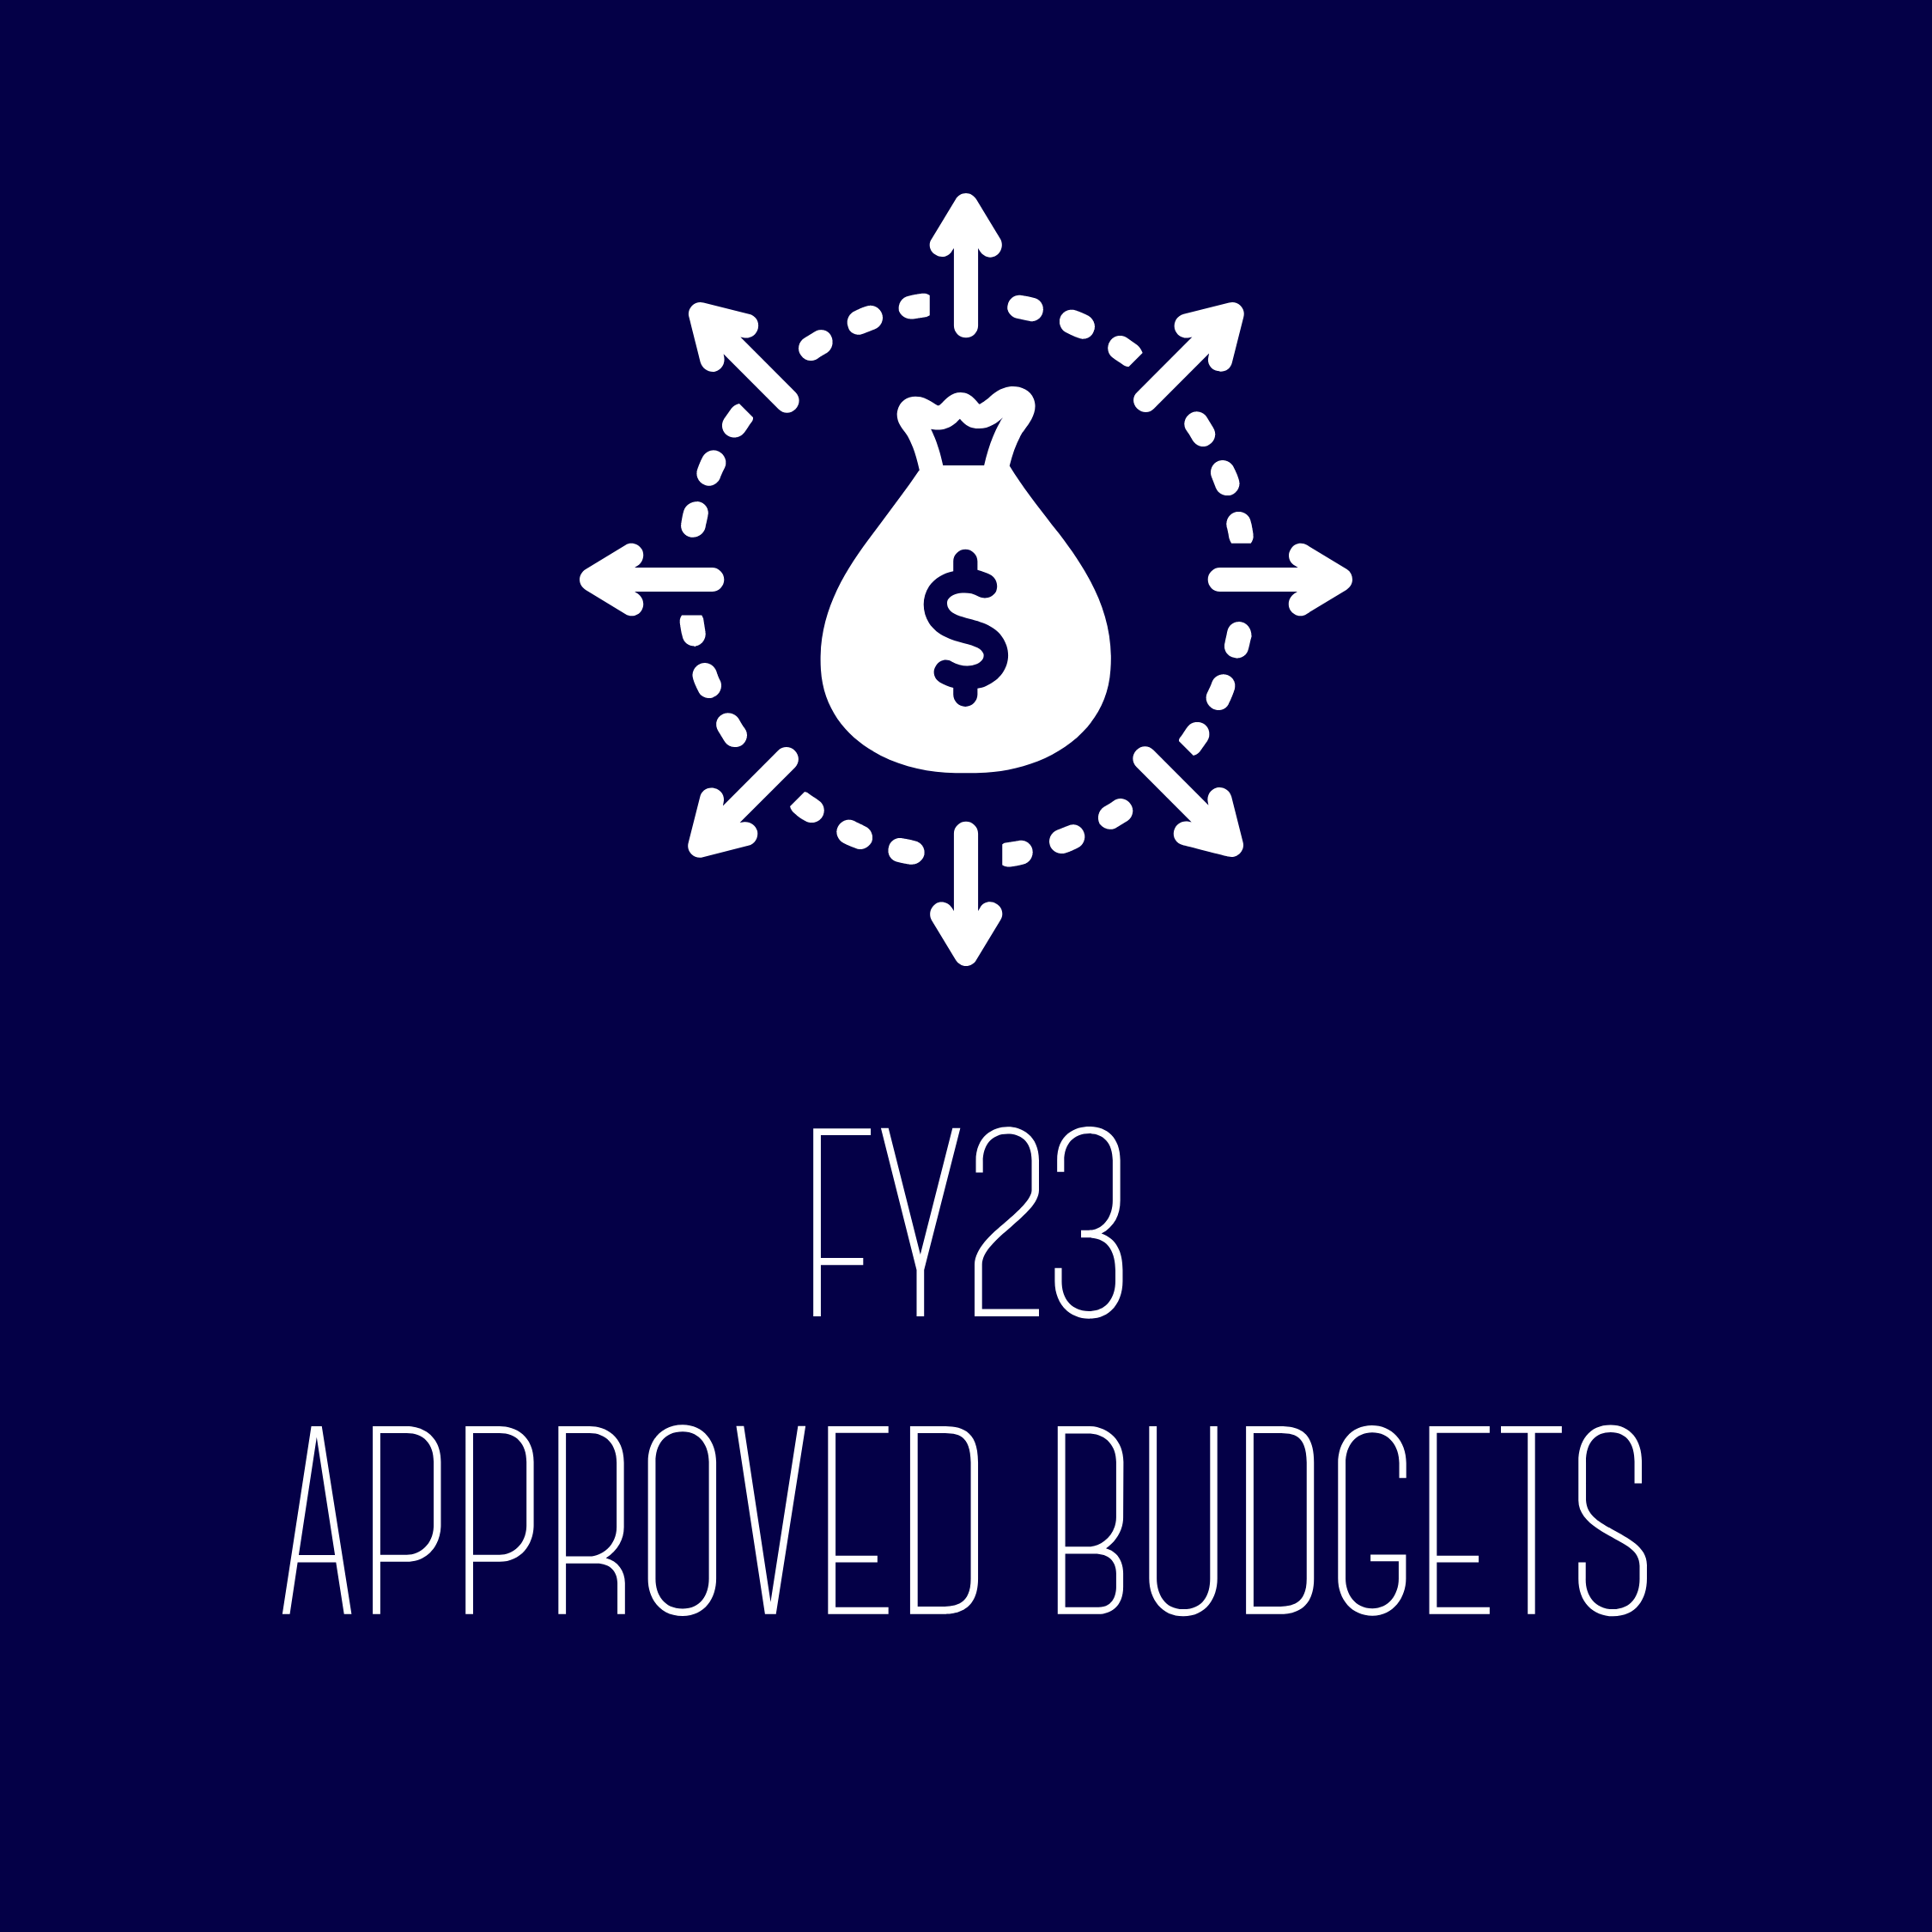 FY23 Approved Budgets